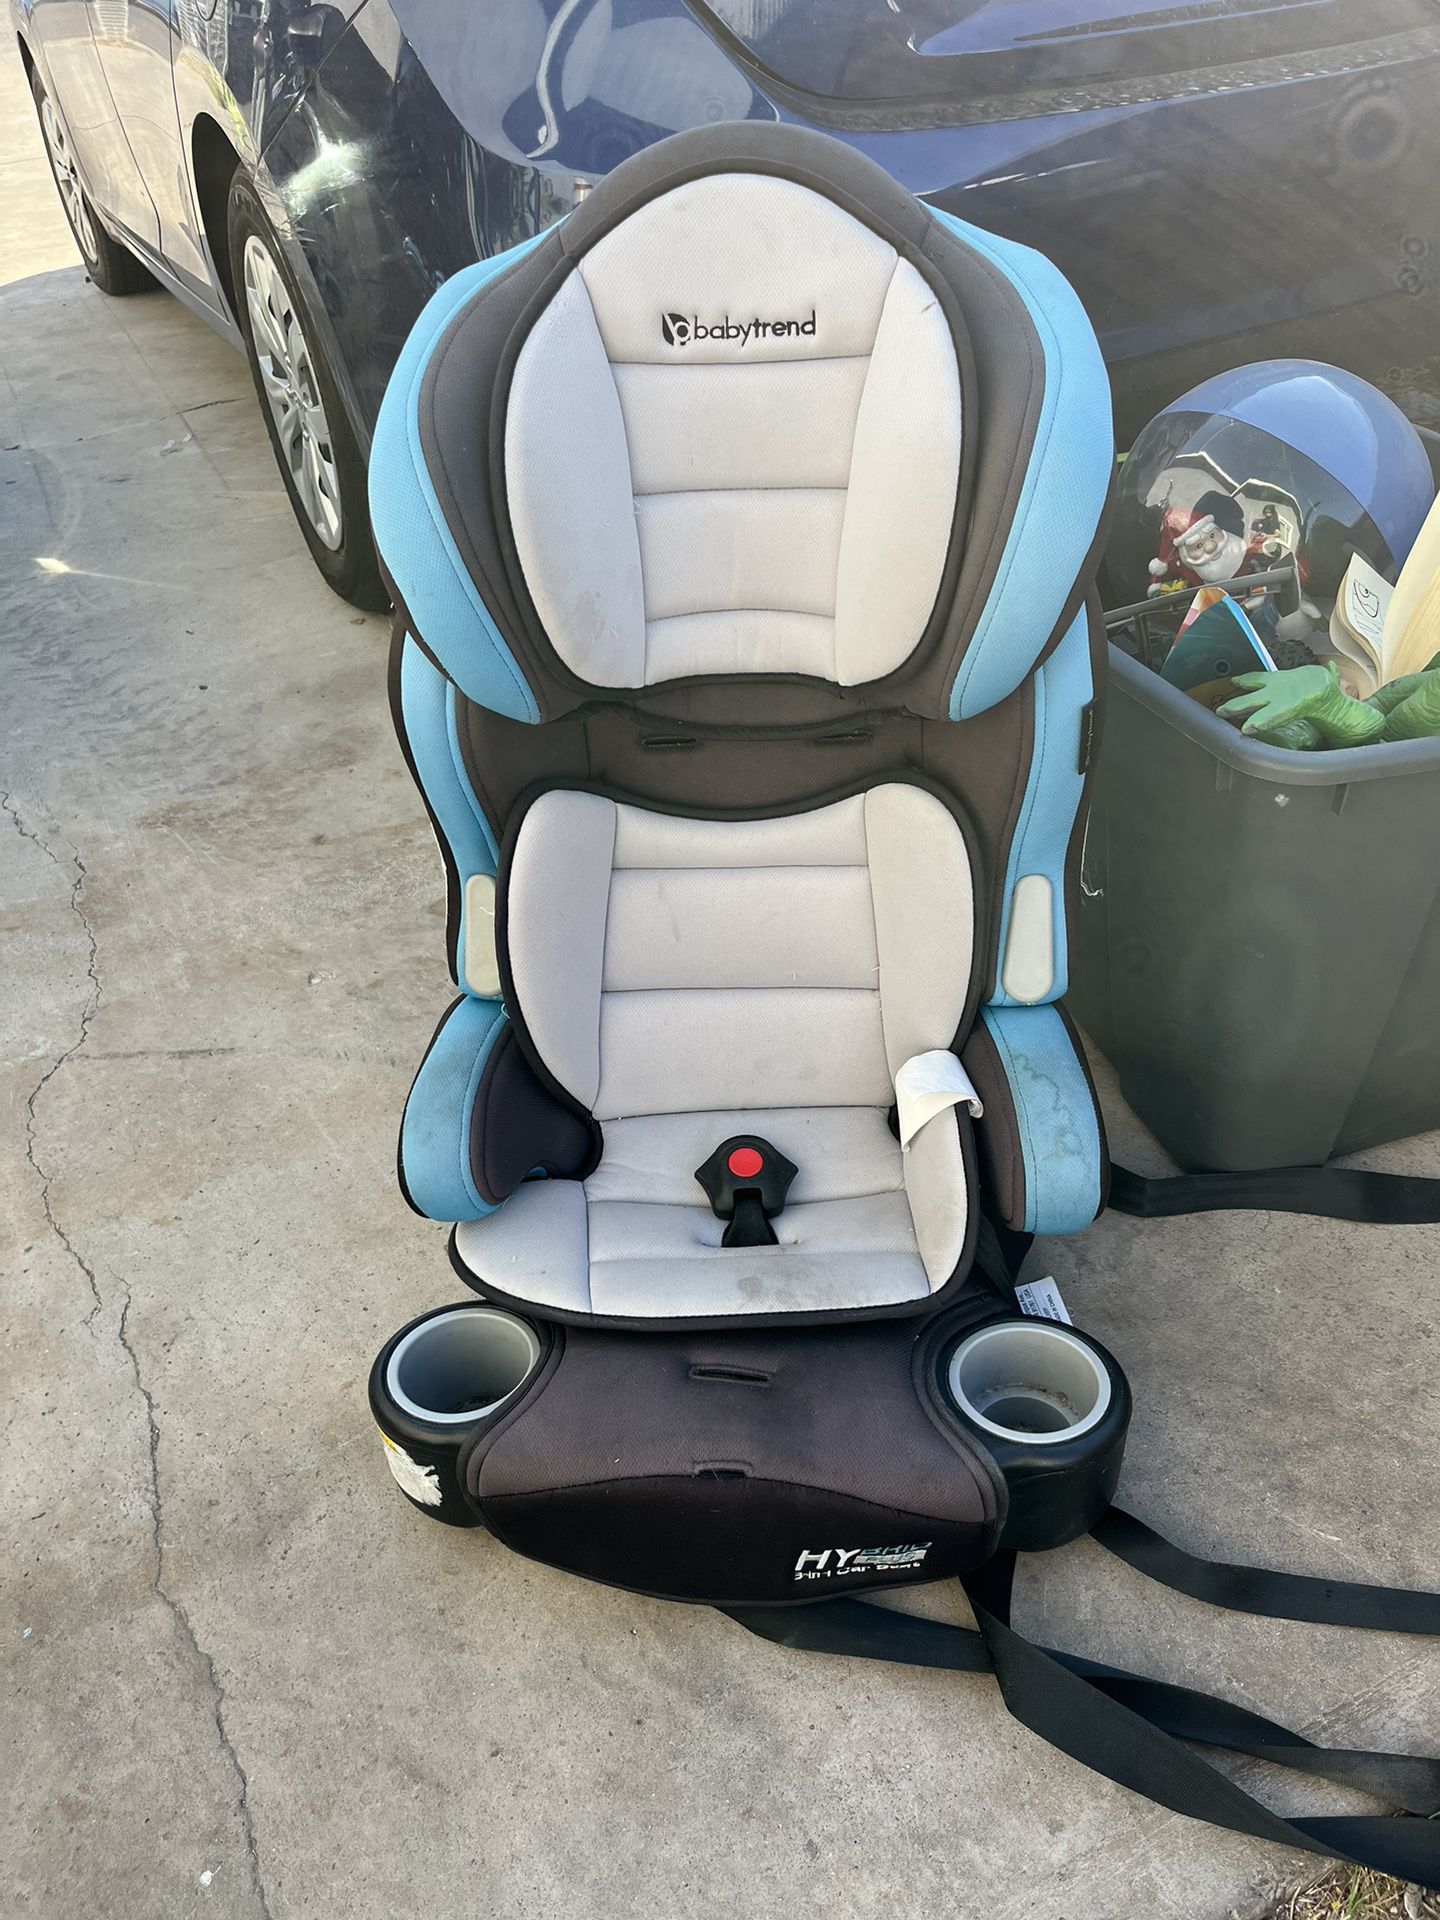 Babytrend Hybrid Plus 3in1 Convertible Car Seat